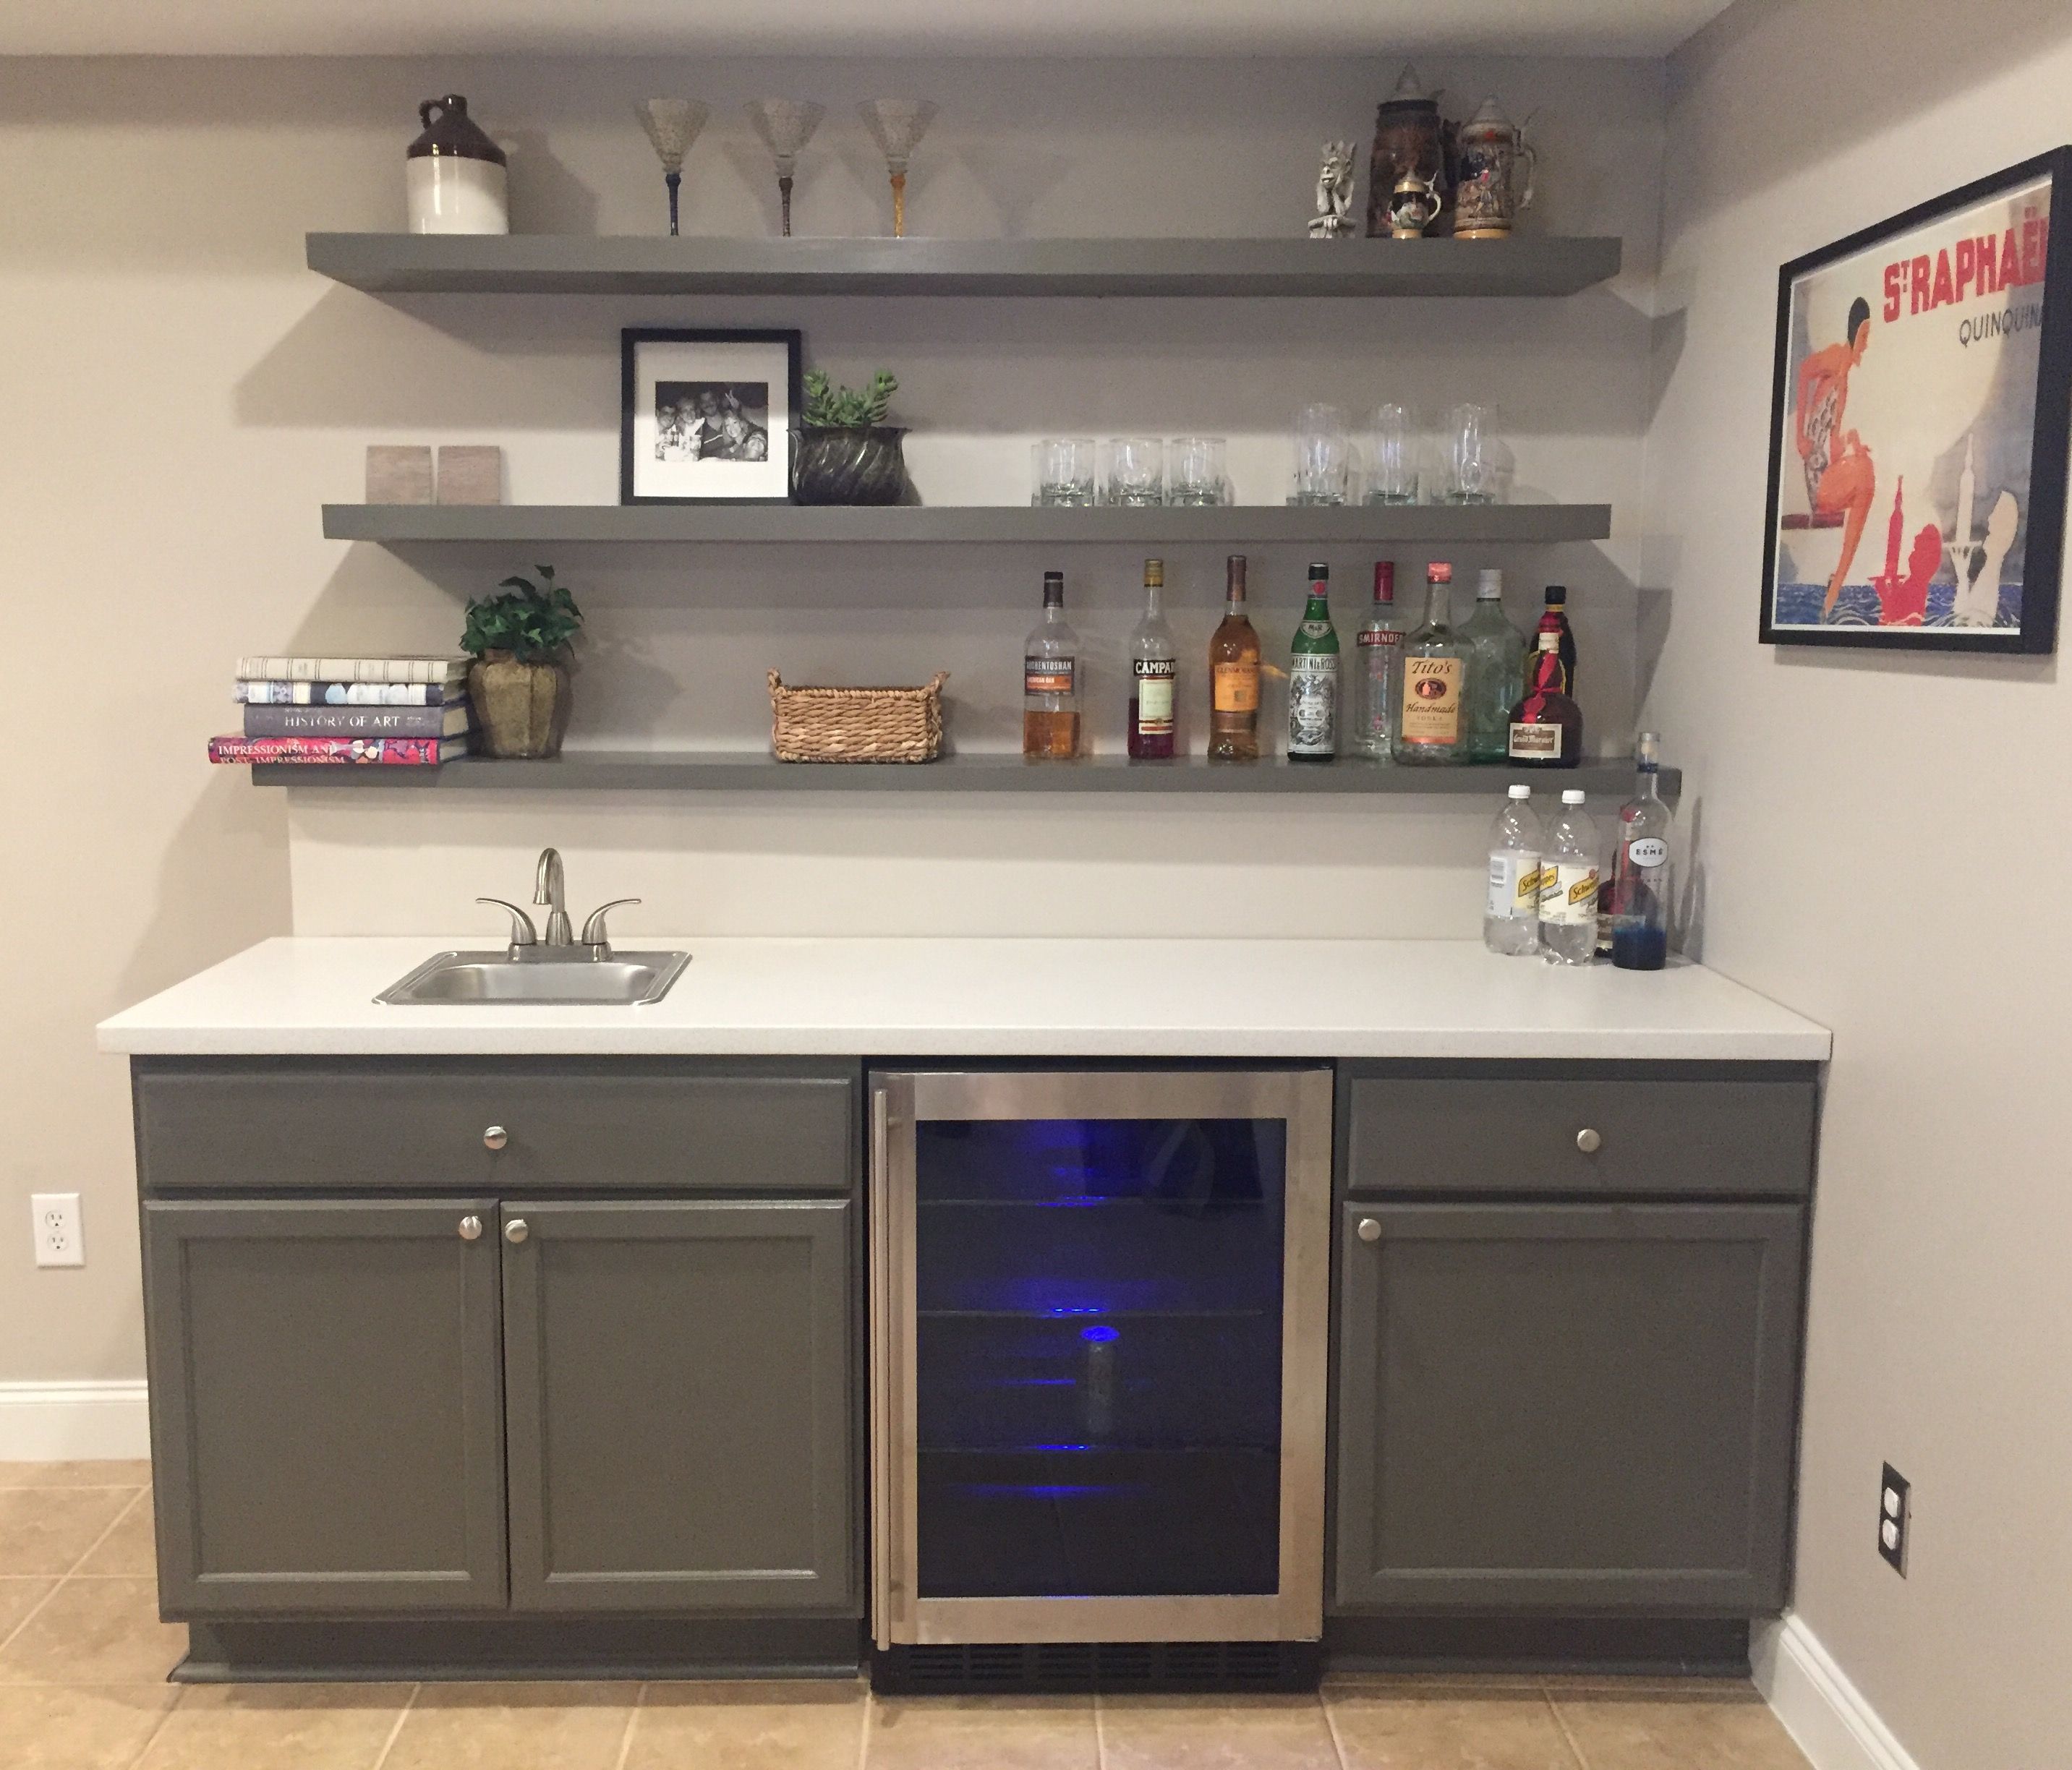 Kitchen design ideas a bar area with IKEA cabinets